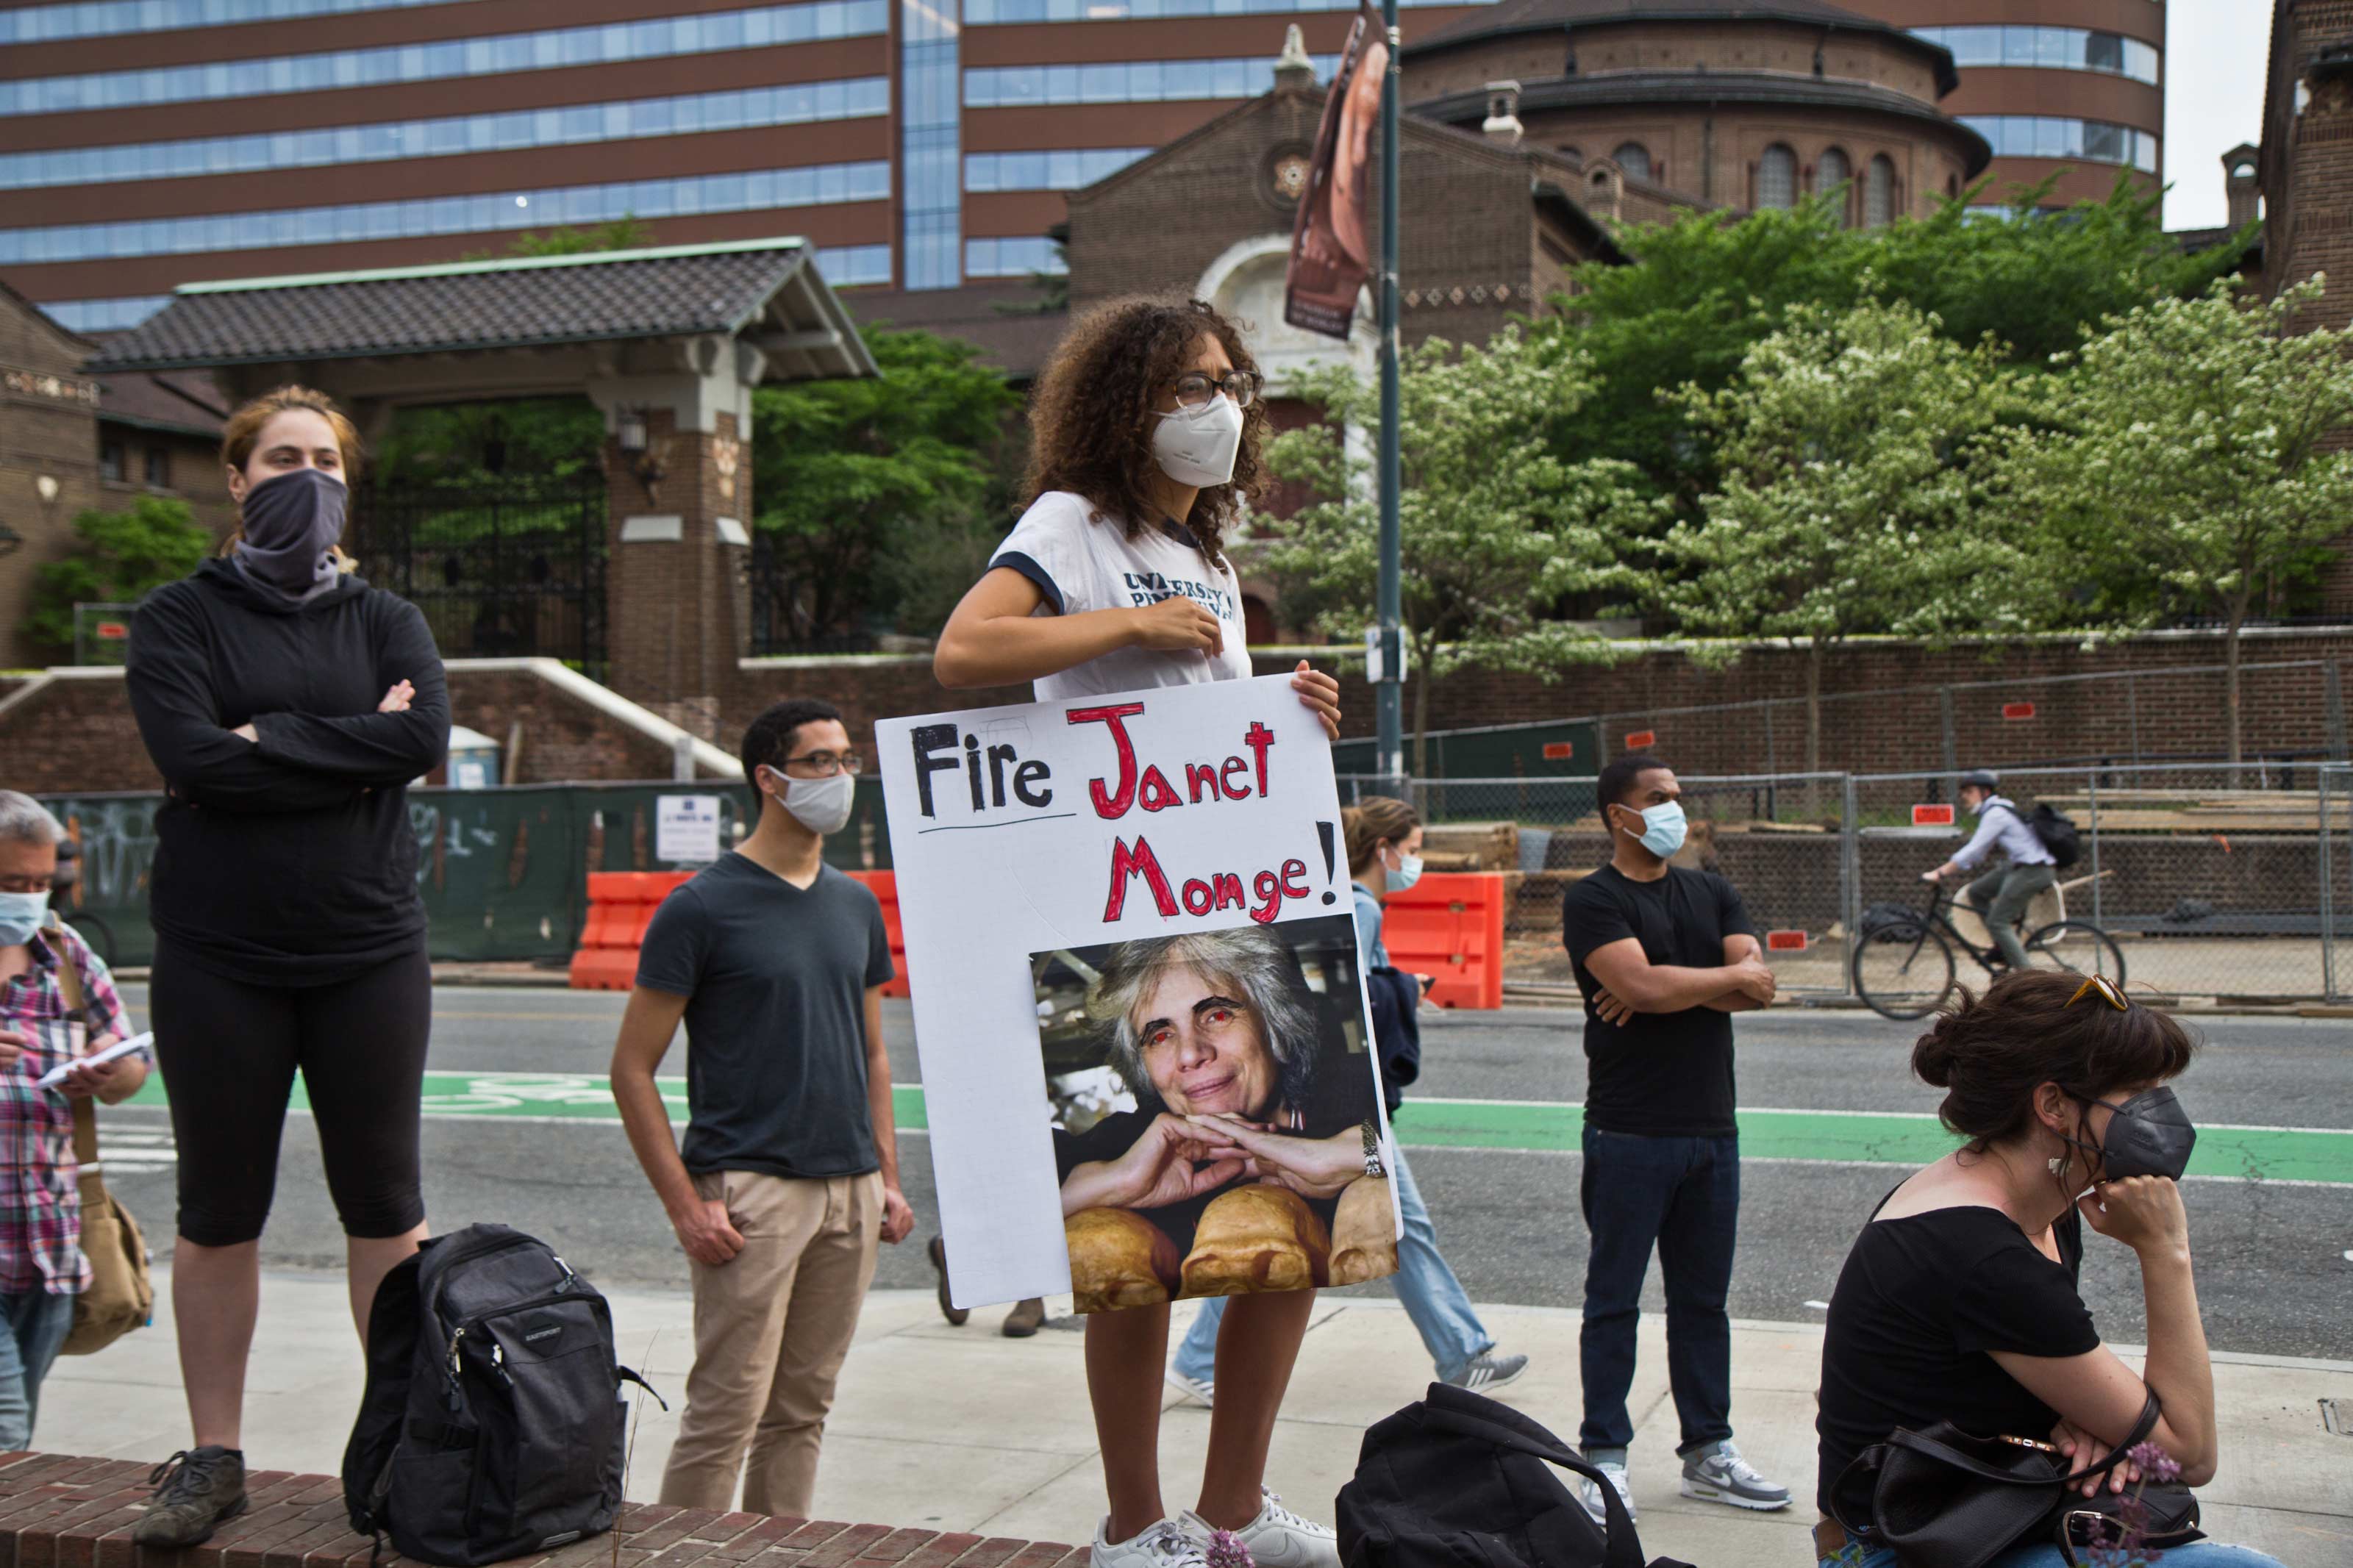 Protesters called for the firing of Penn Museum’s Janet Monge, at a protest outside the Penn Museum on April 28, 2021. (Kimberly Paynter/WHYY)